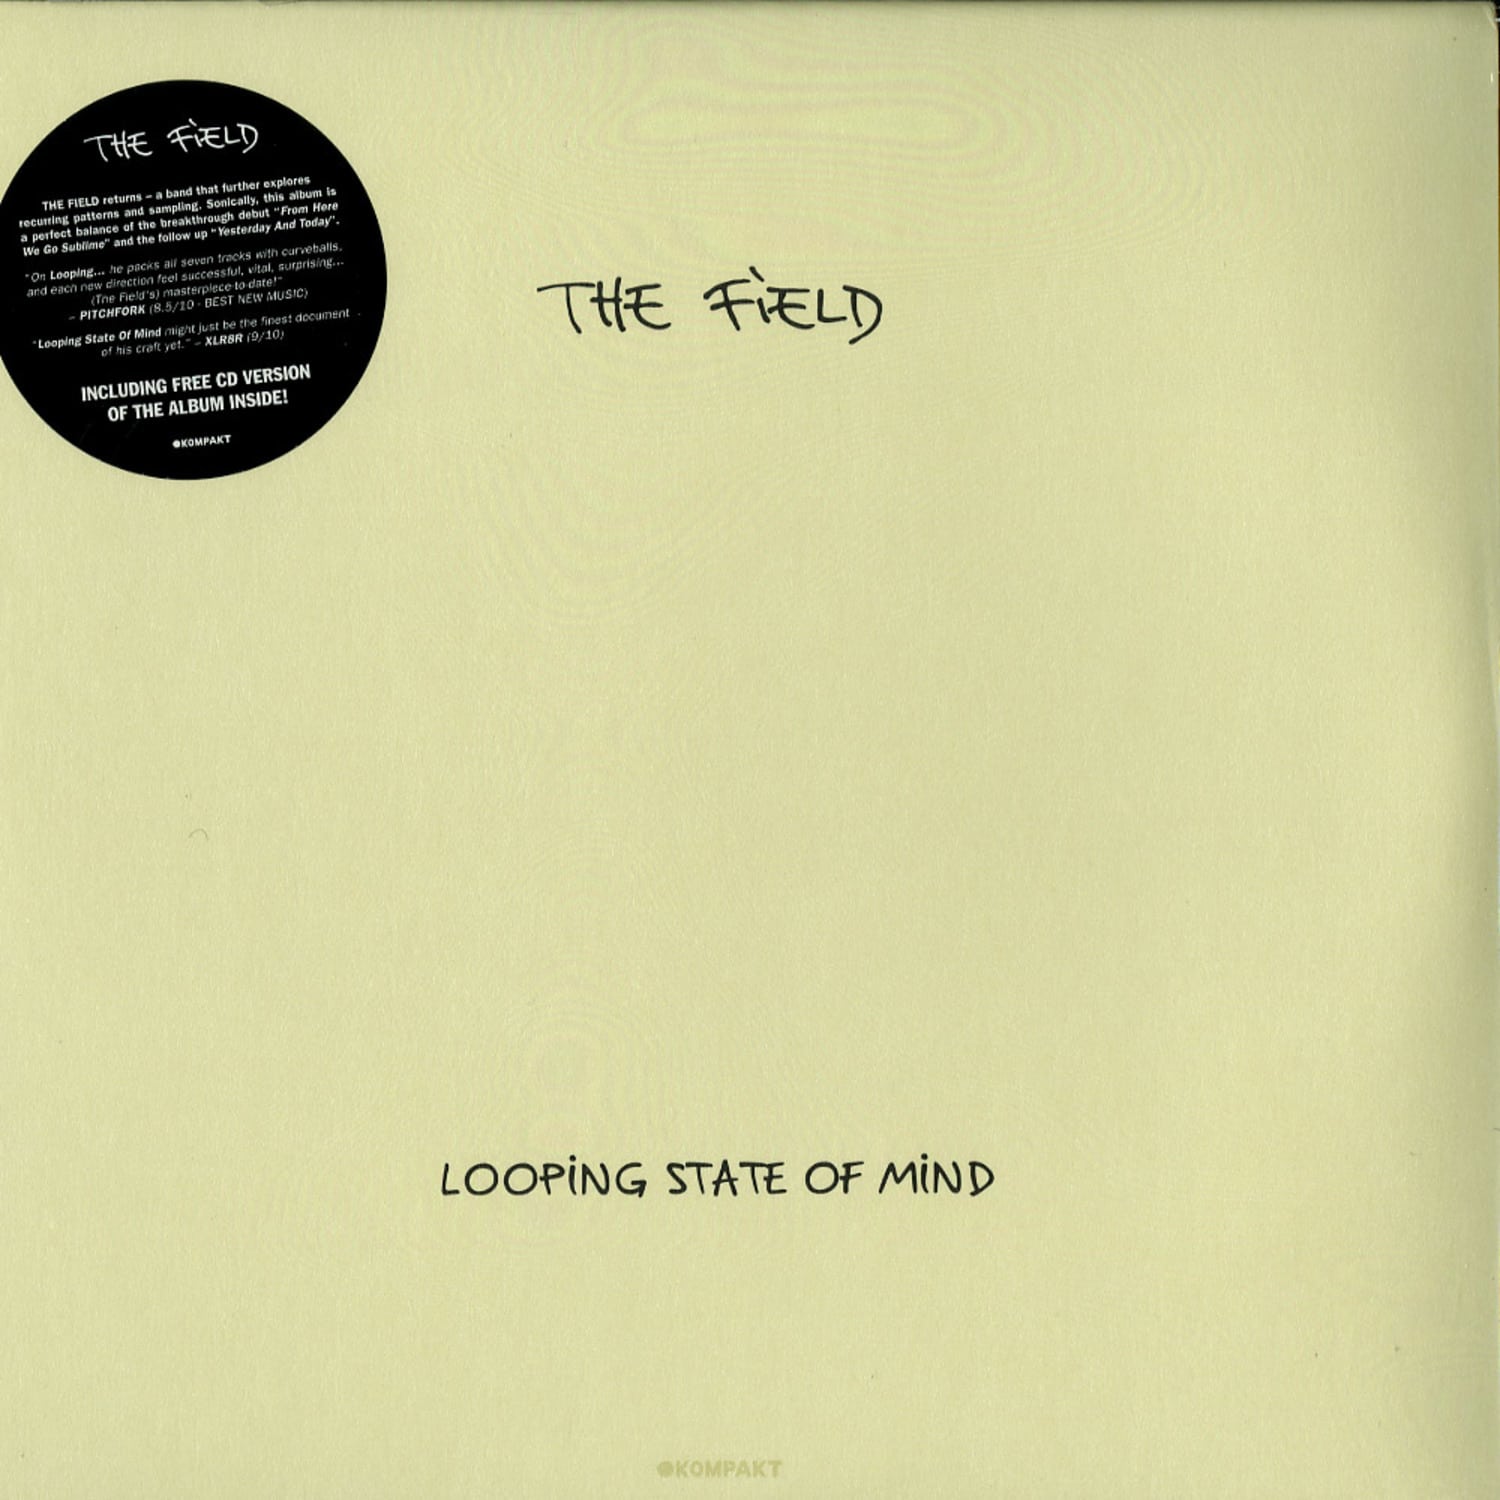 The Field - LOOPING STATE OF MIND 